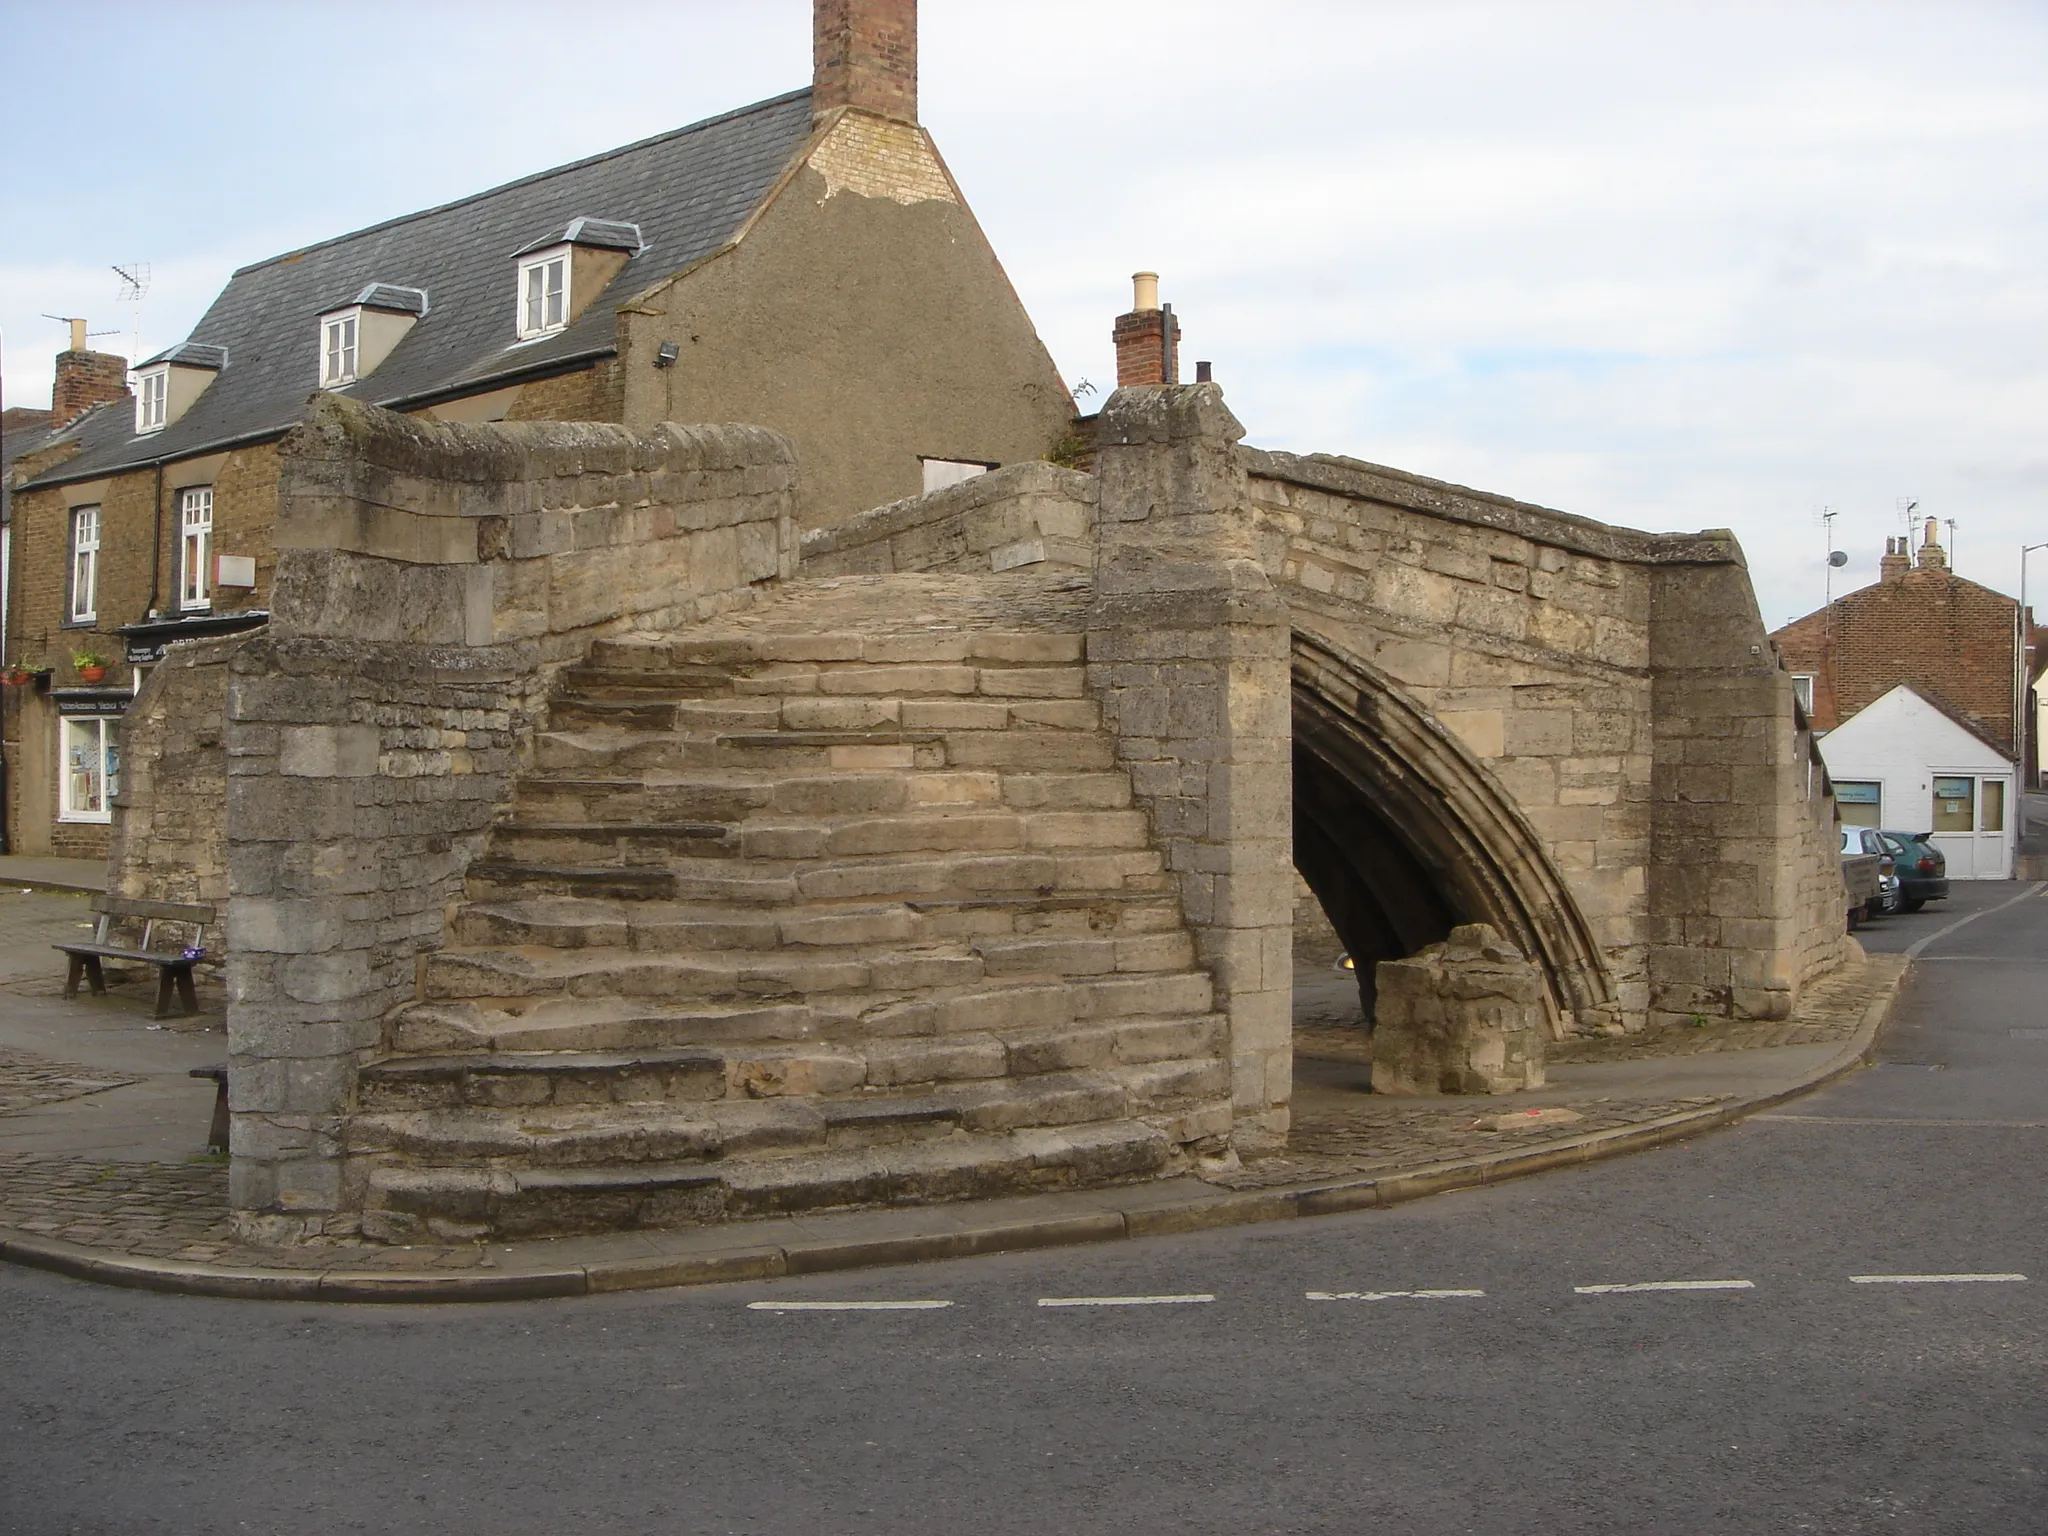 Photo showing: Trinity Bridge in Crowland Town, Lincolnshire. The triangular Trinity Bridge stands on dry land. Built between 1360 and 1390.